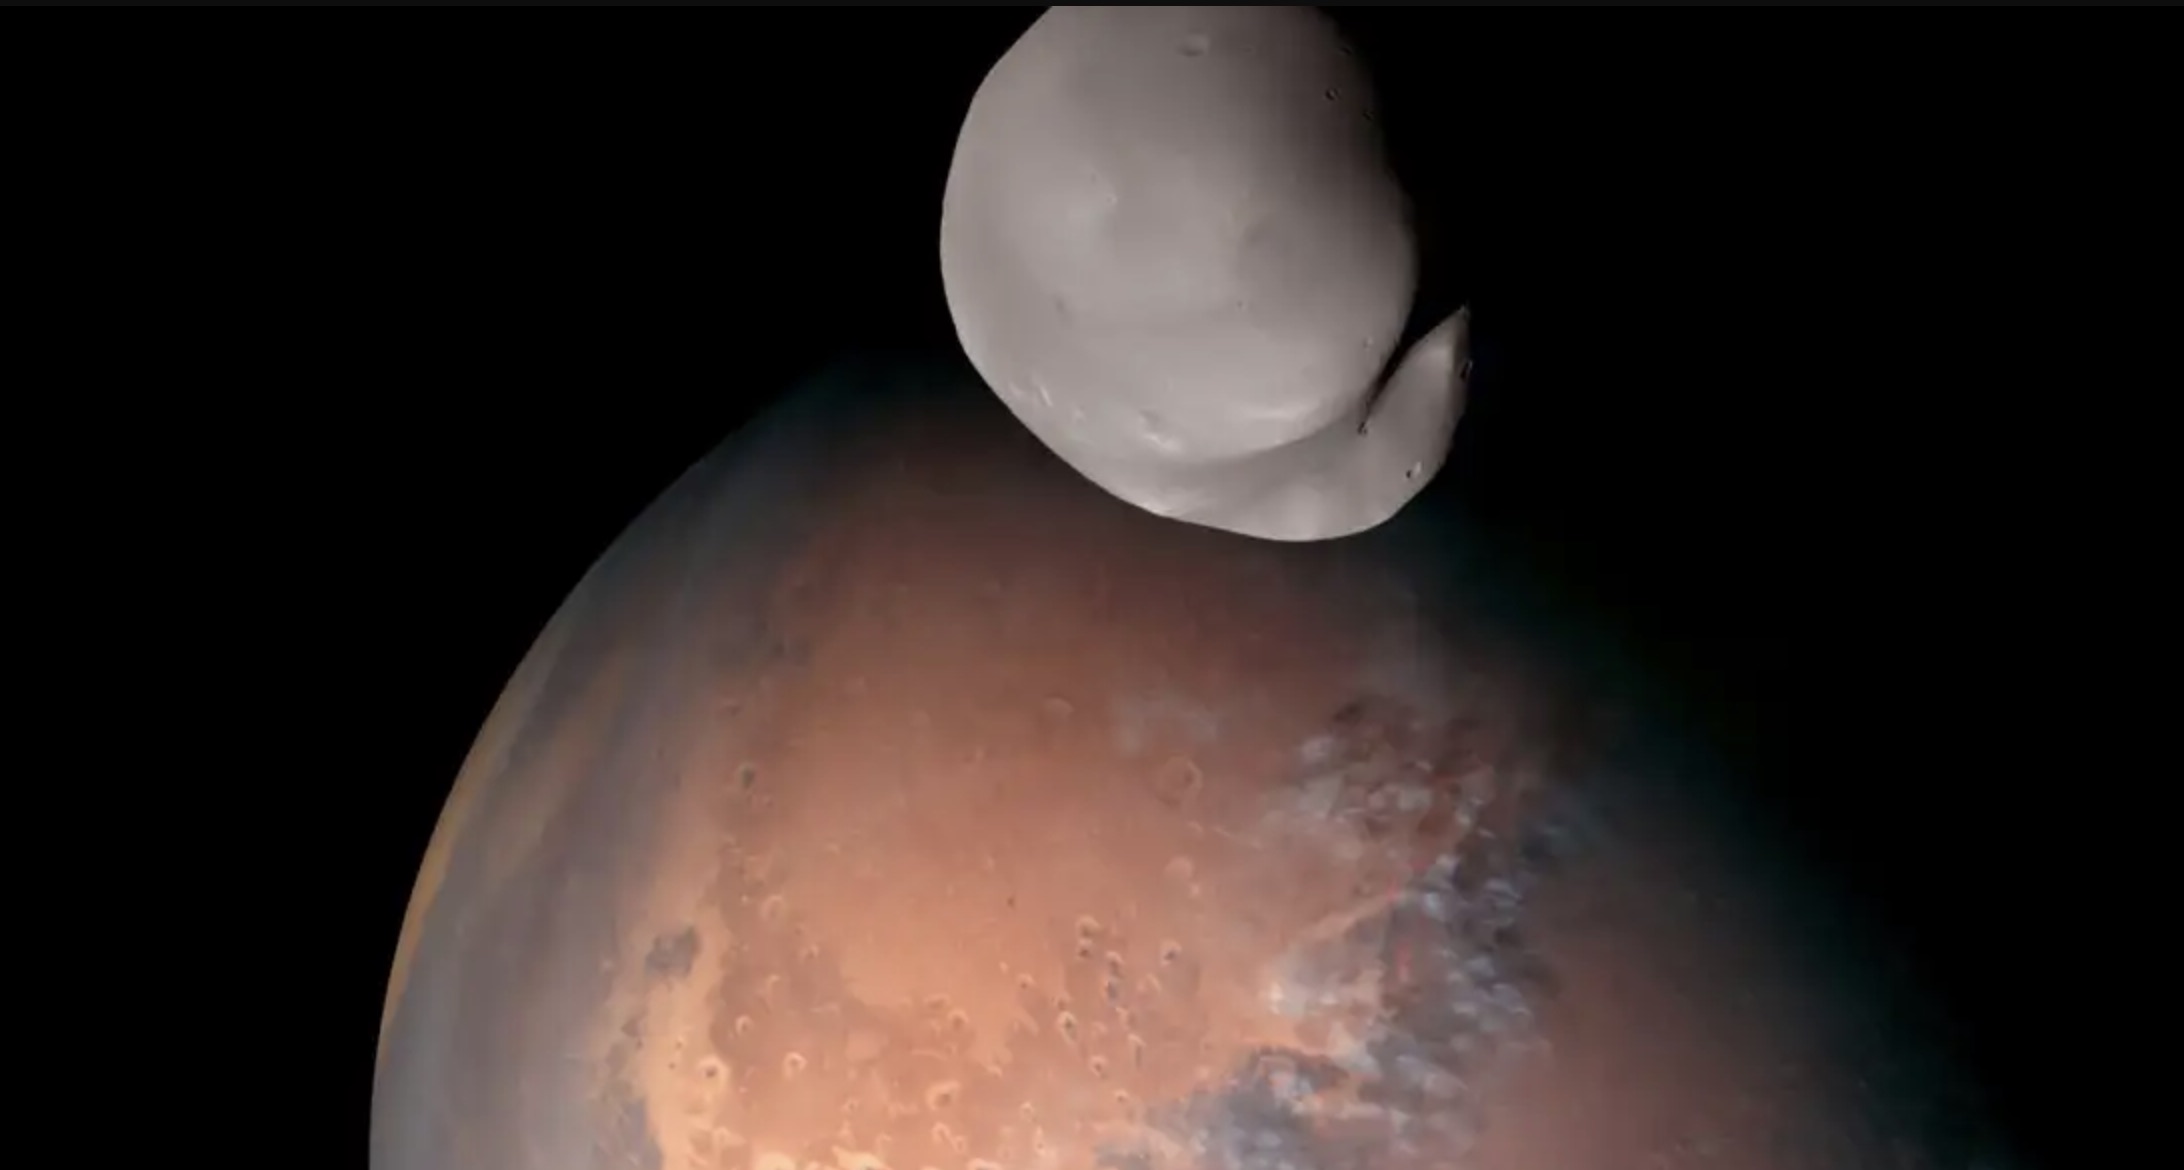 Photograph showing Mars and its moon Deimos. Emirates Mars Mission.